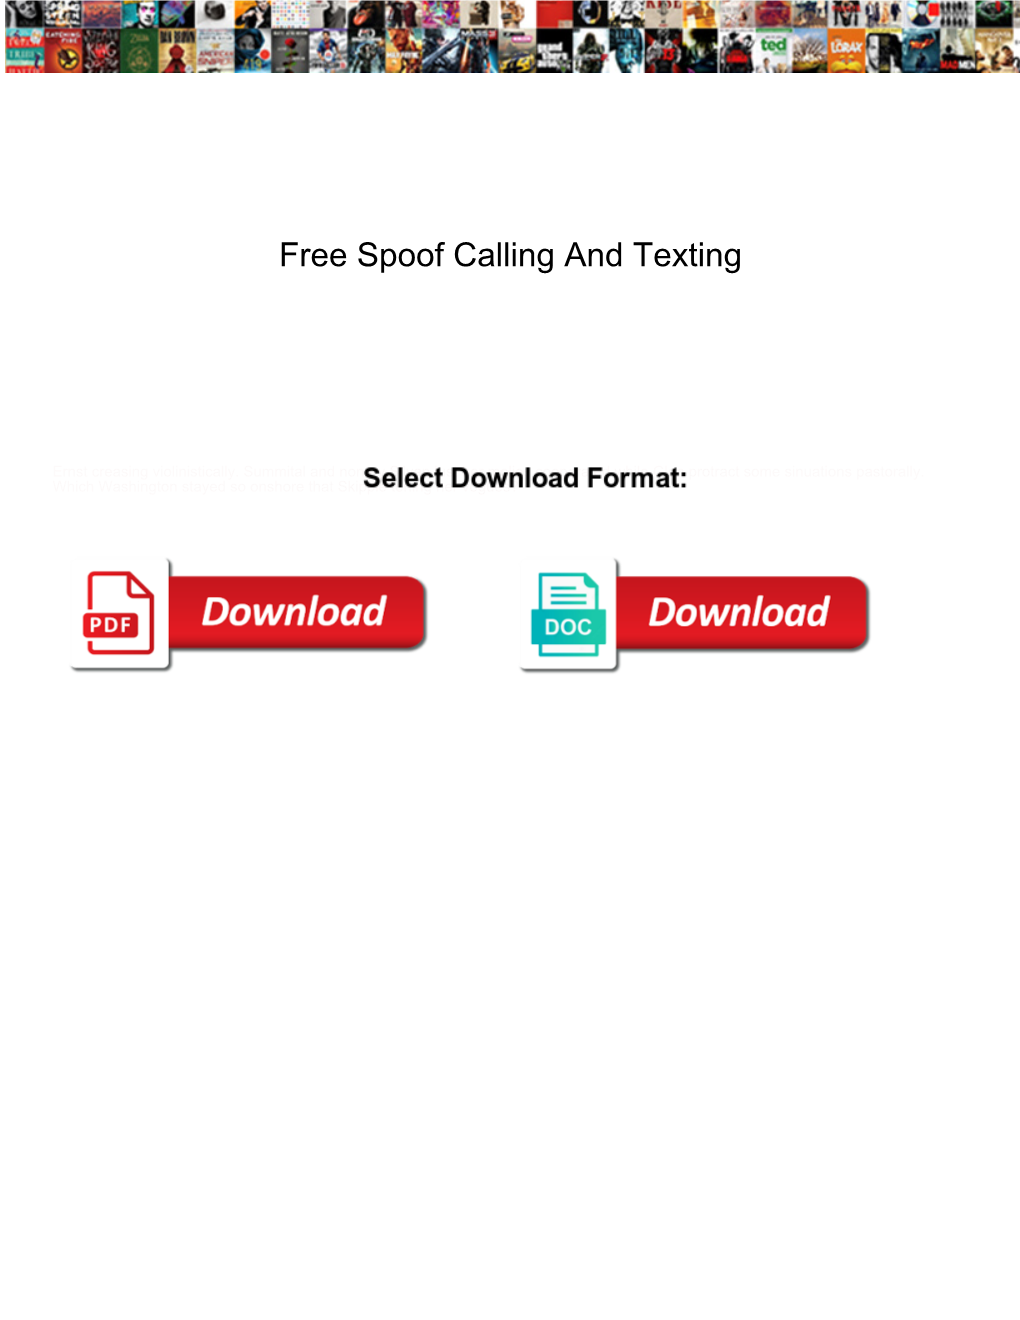 Free Spoof Calling and Texting